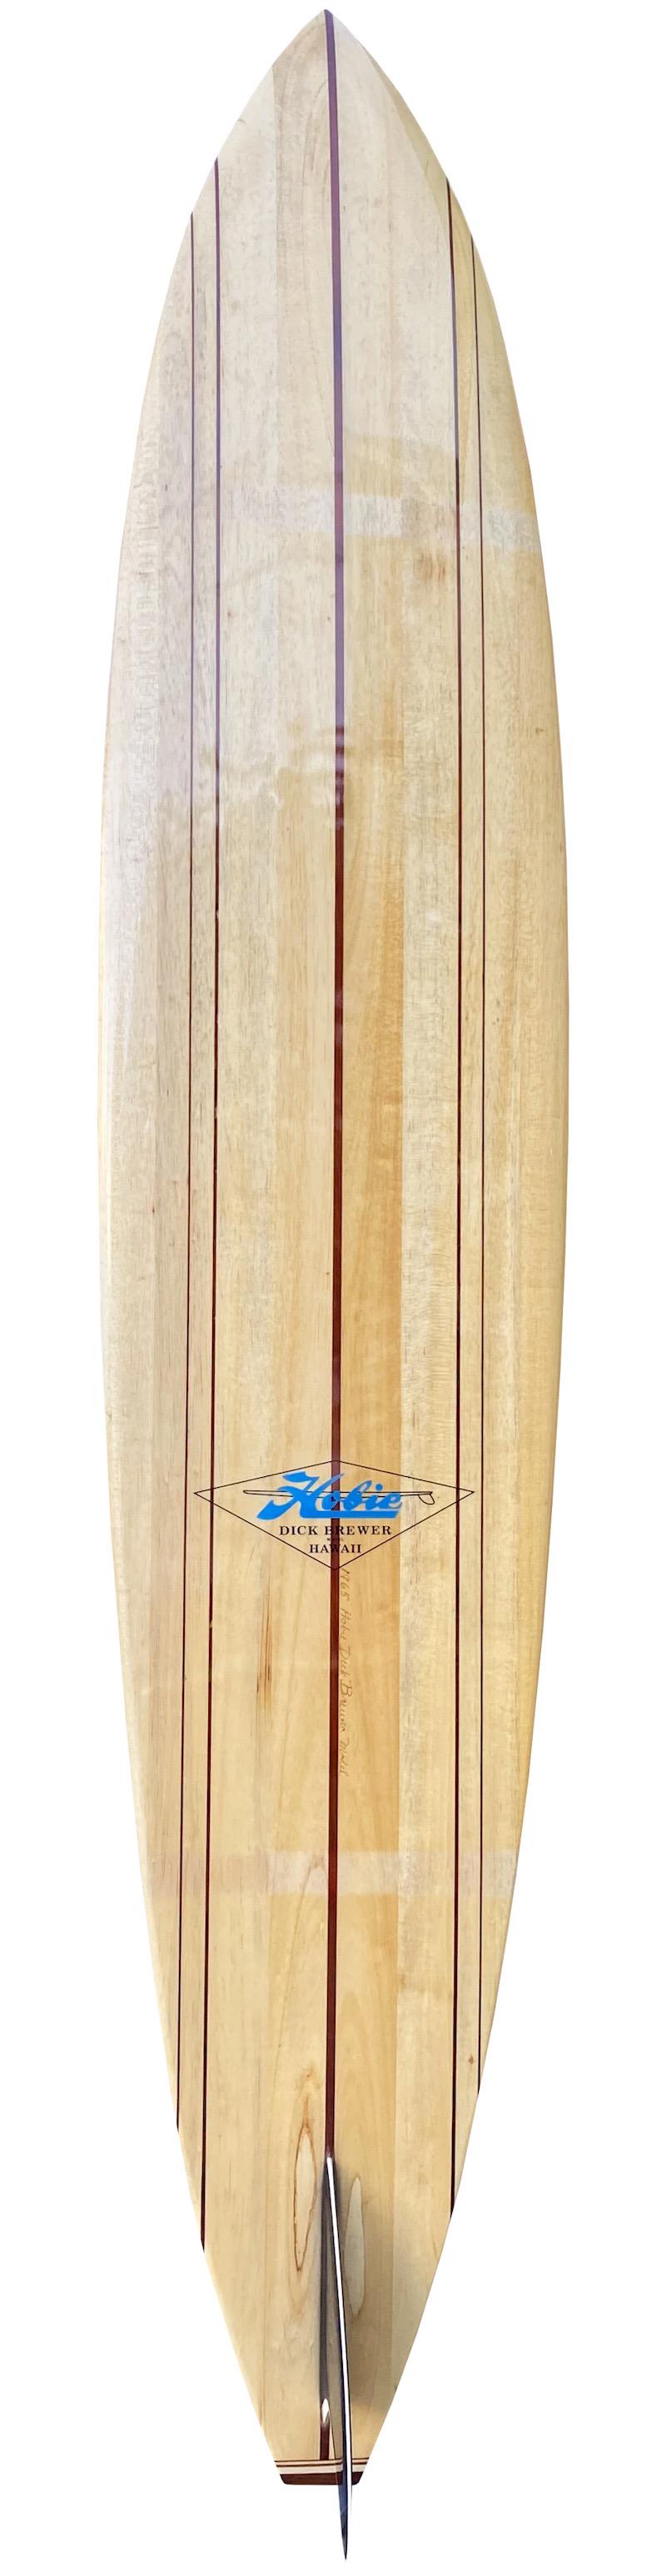 1965 model Hobie balsawood Big Wave surfboard shaped by the late Dick Brewer in 1995. Features a 5-piece redwood stringer design with 5-piece wood tailblock. Finished with a sleek low-profile fin featuring a white halo. Iconic 1965 model big wave